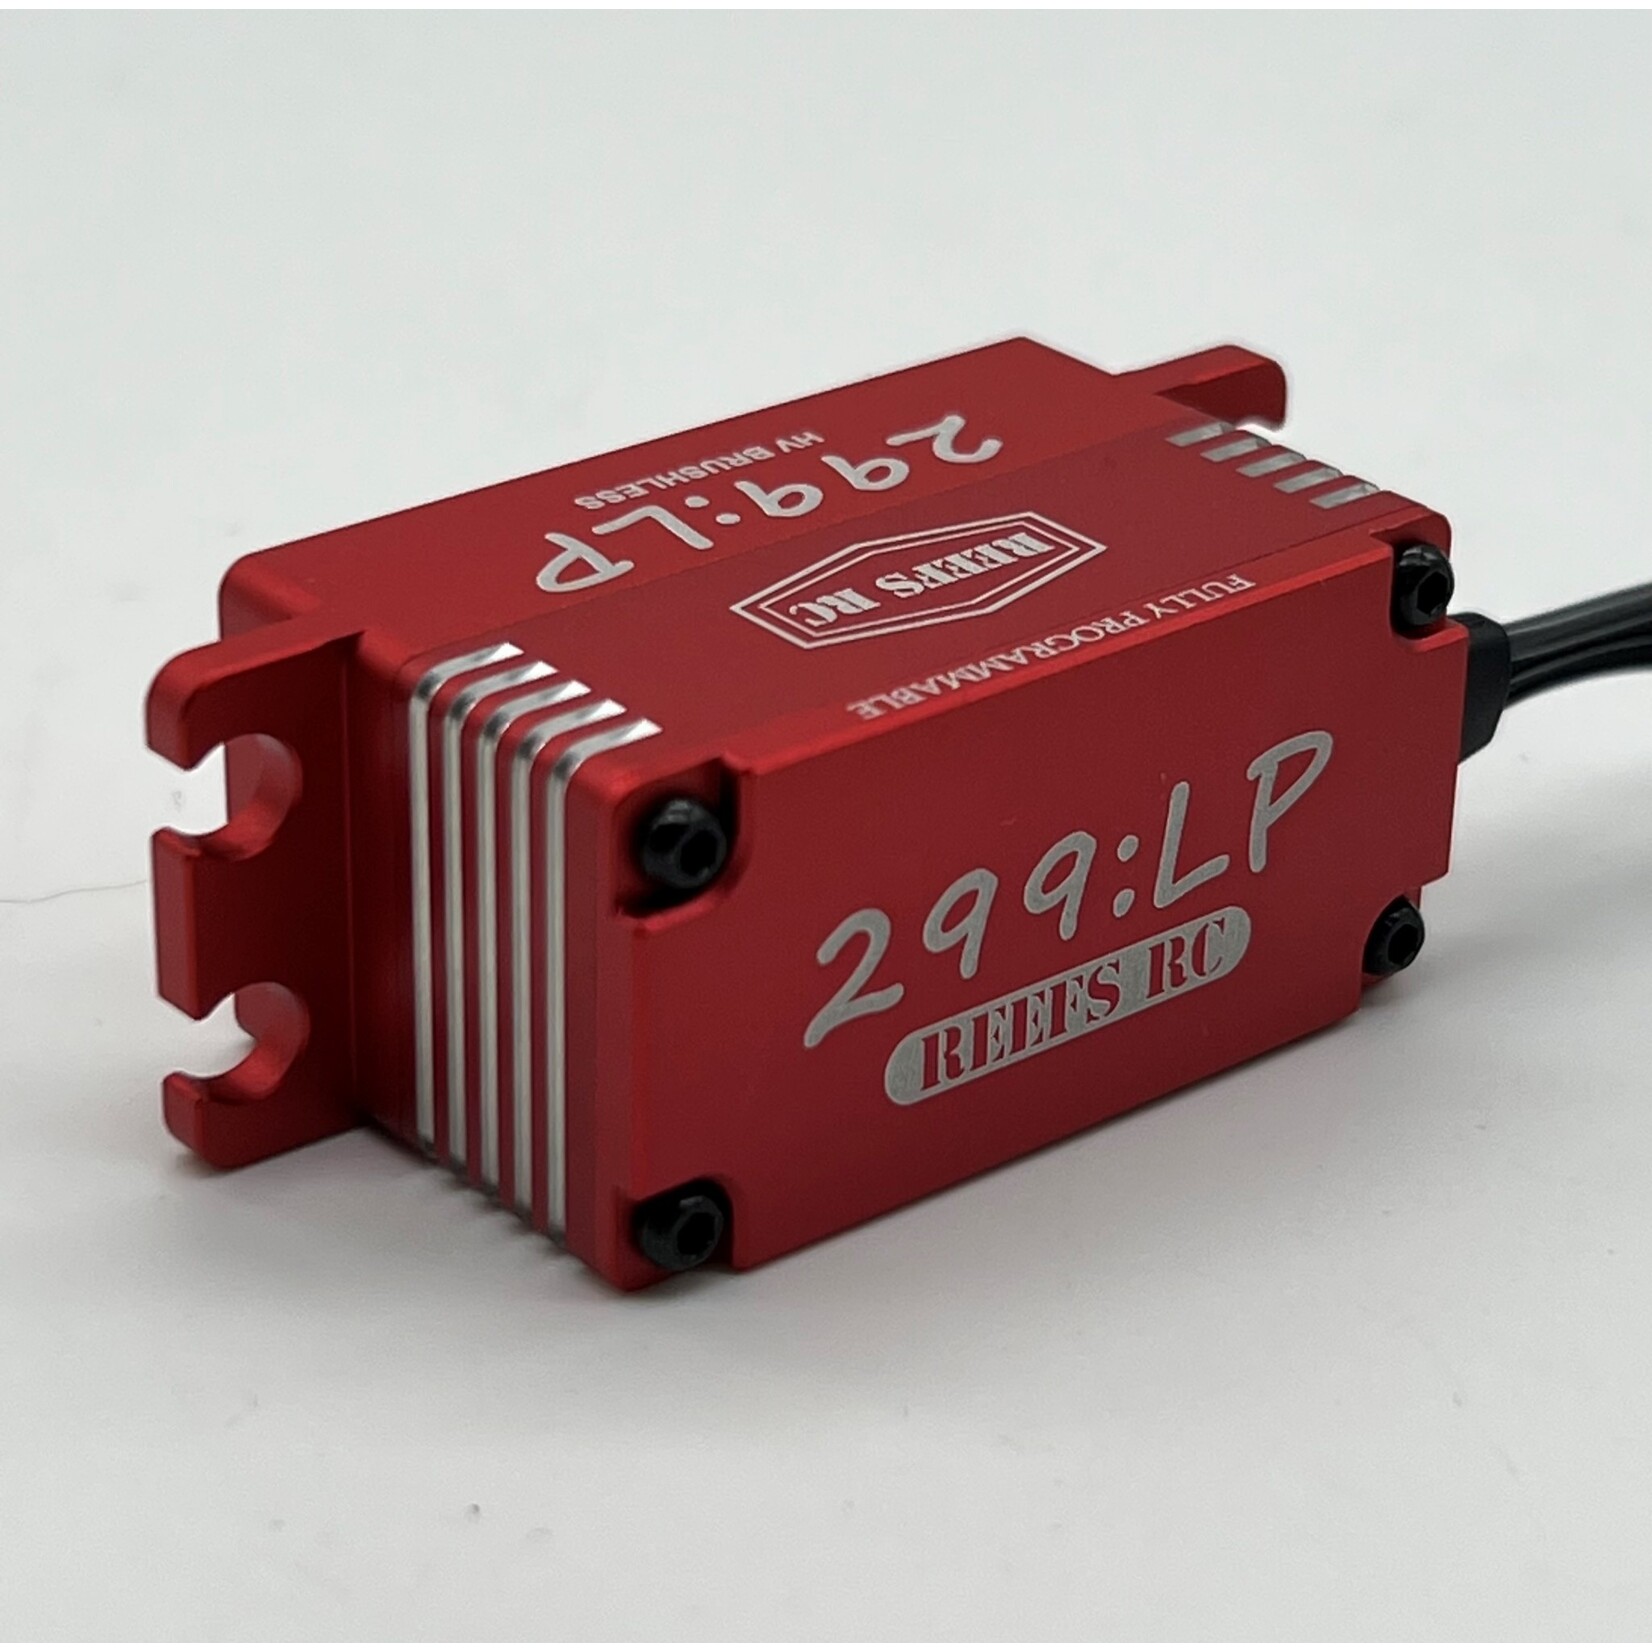 Reefs RC Reefs RC 299LP High Torque/Speed Brushless Low Profile Servo (High Voltage) (Red) #REEFS130